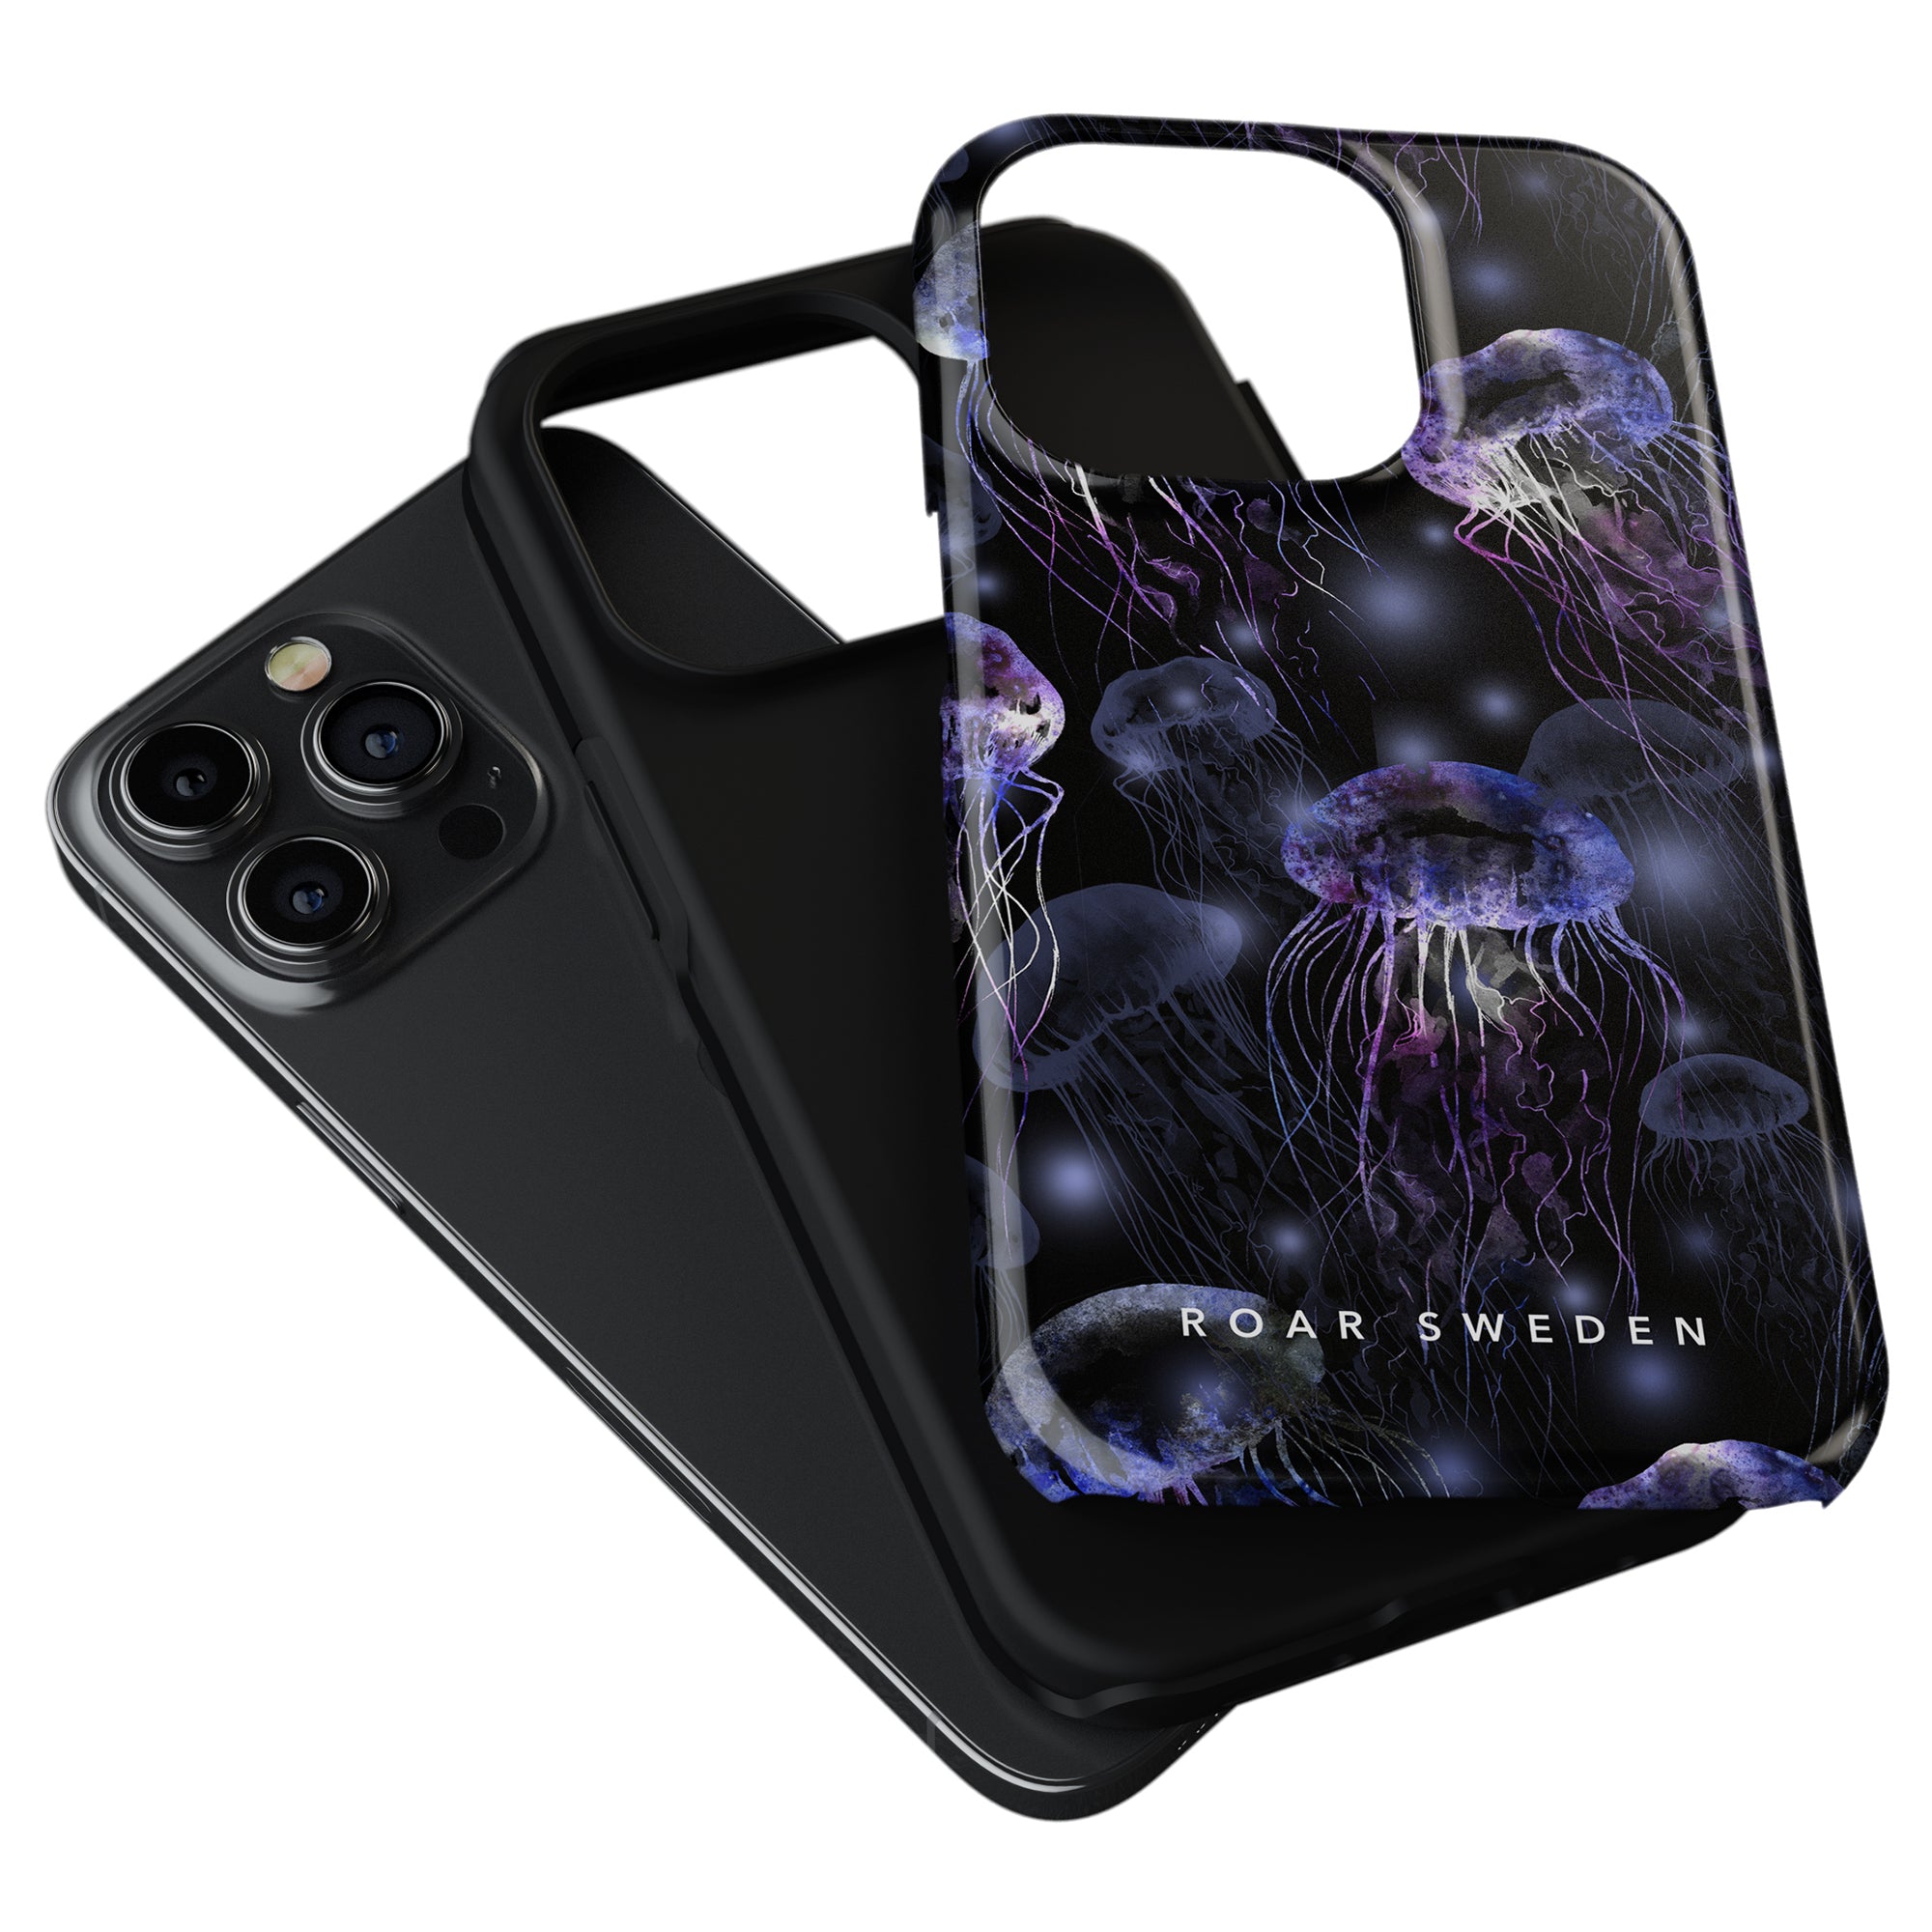 A smartphone with a camera in a Smack - Tough Case featuring a jellyfish design, labeled "roar sweden," against a white background.